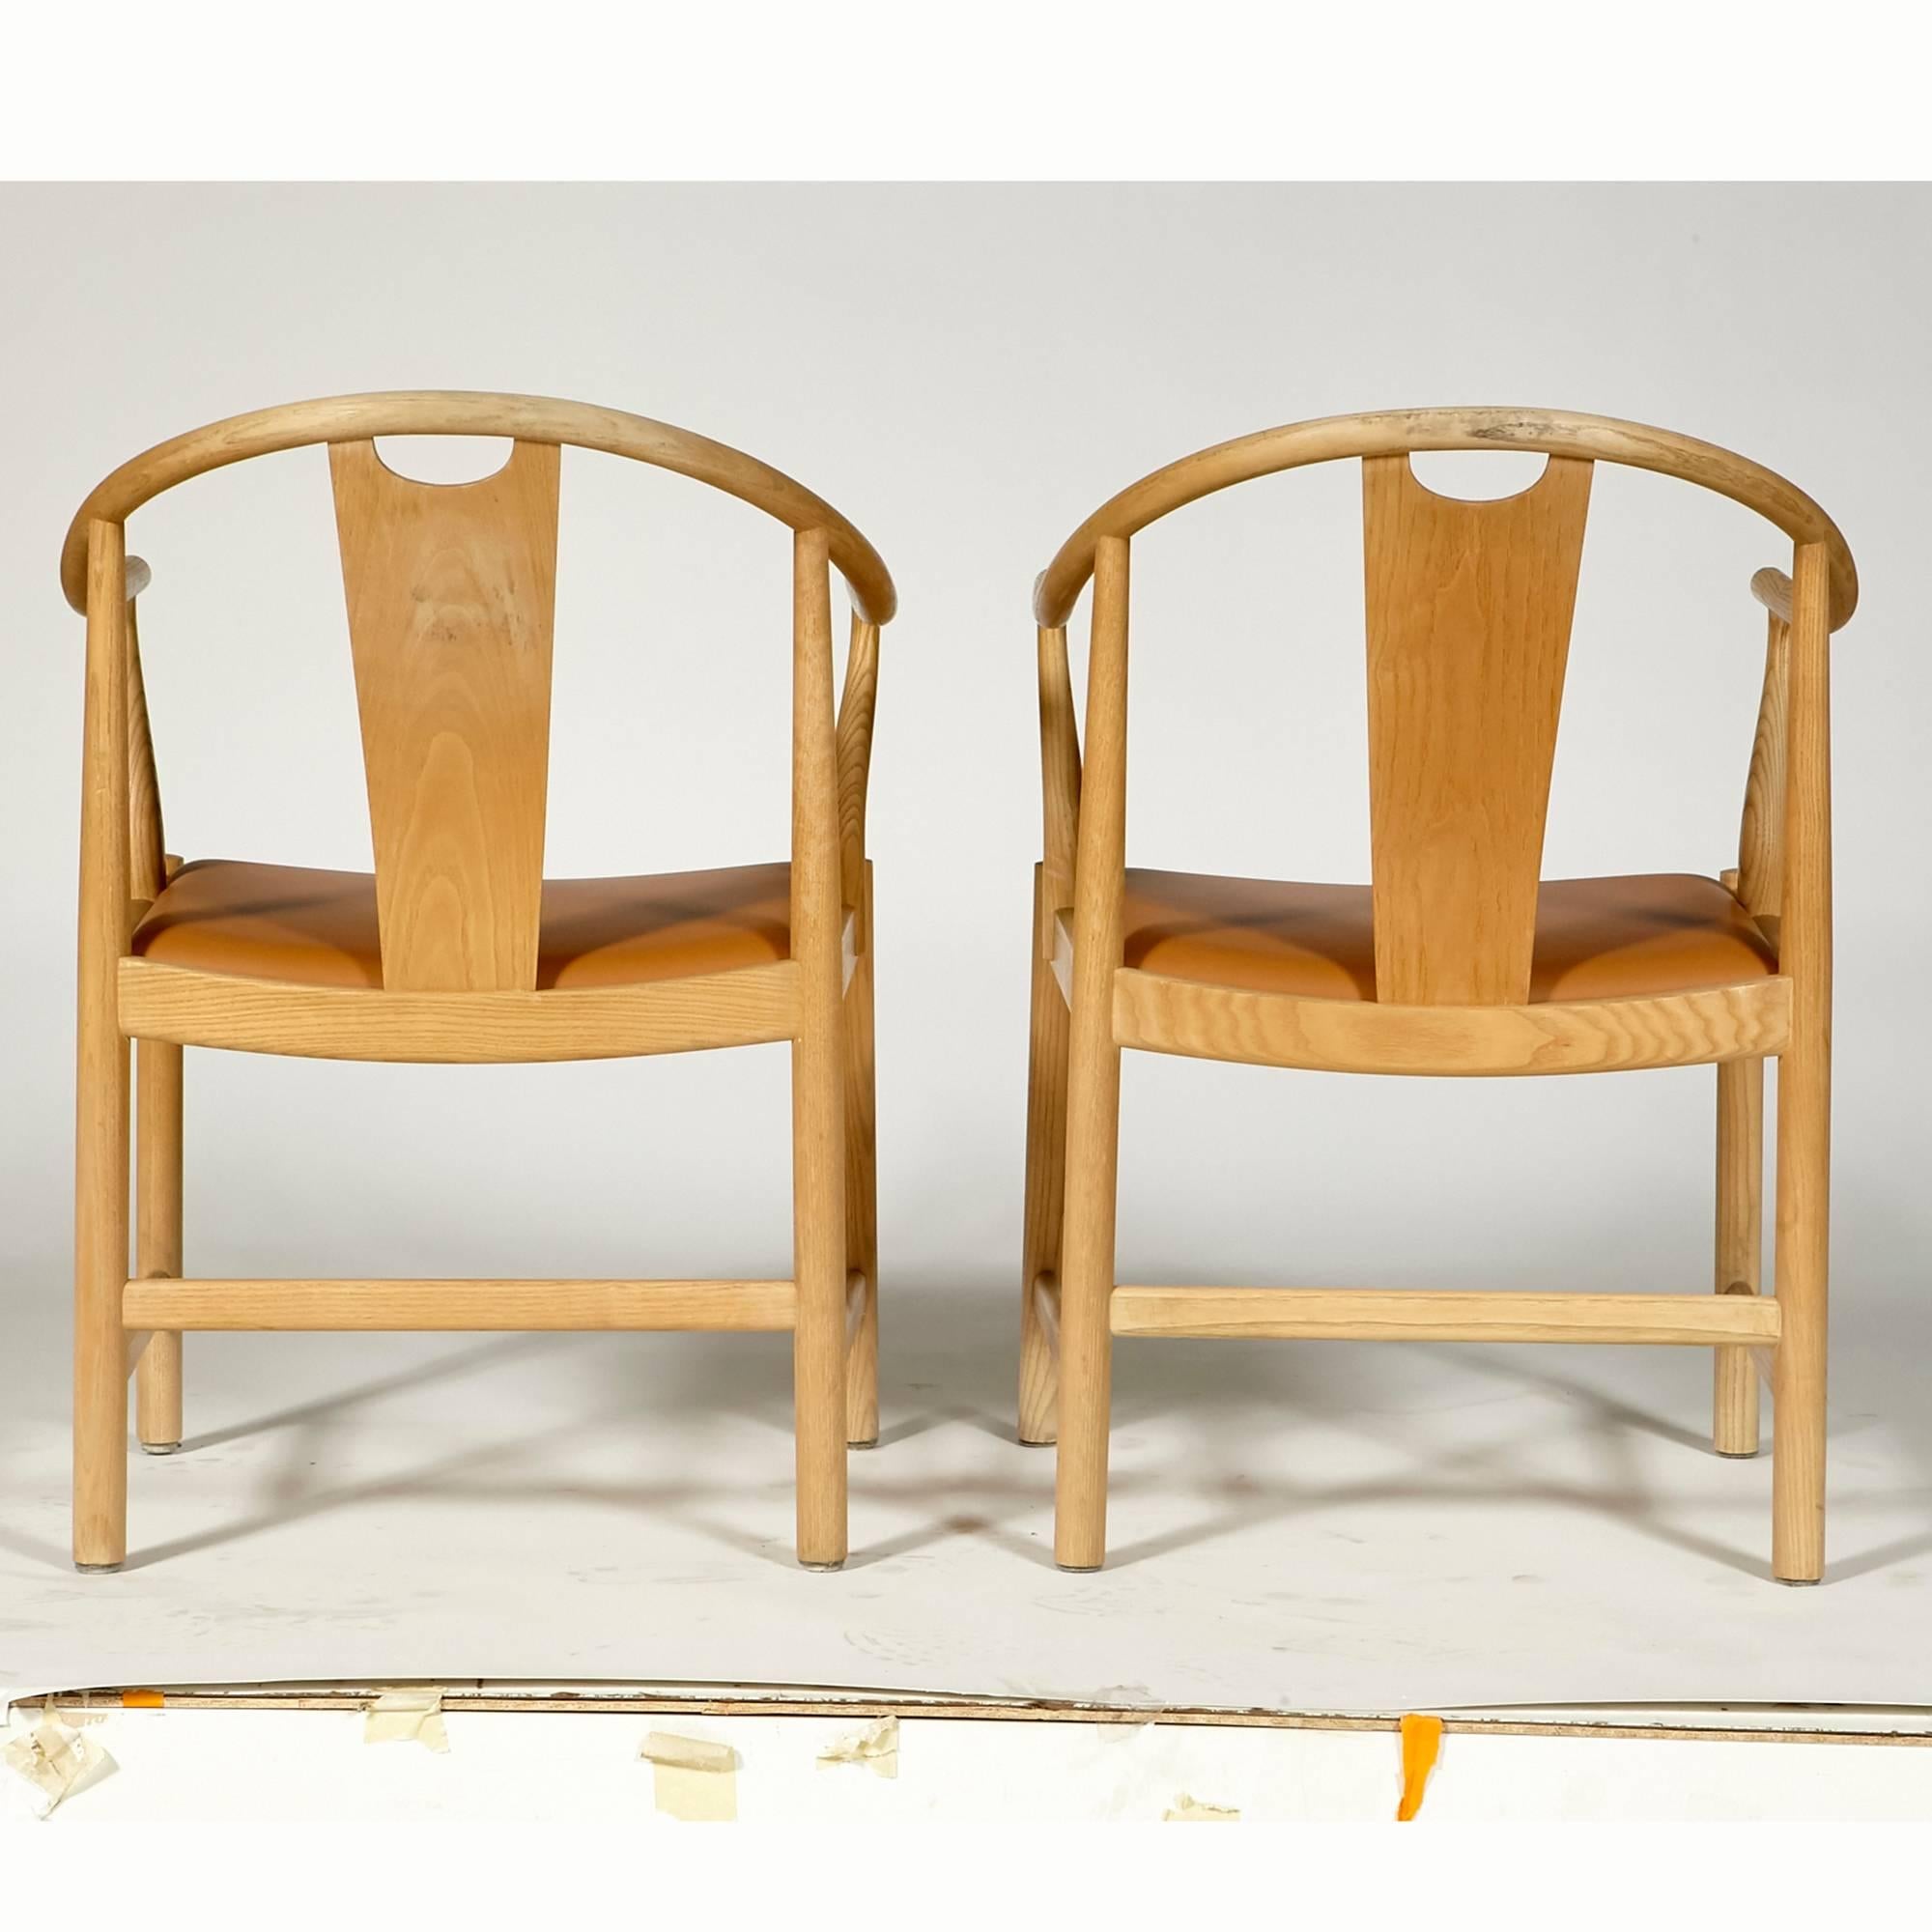 Hans J. Wegner China Chairs for PP Mobler, Pair In Excellent Condition For Sale In Amherst, NH